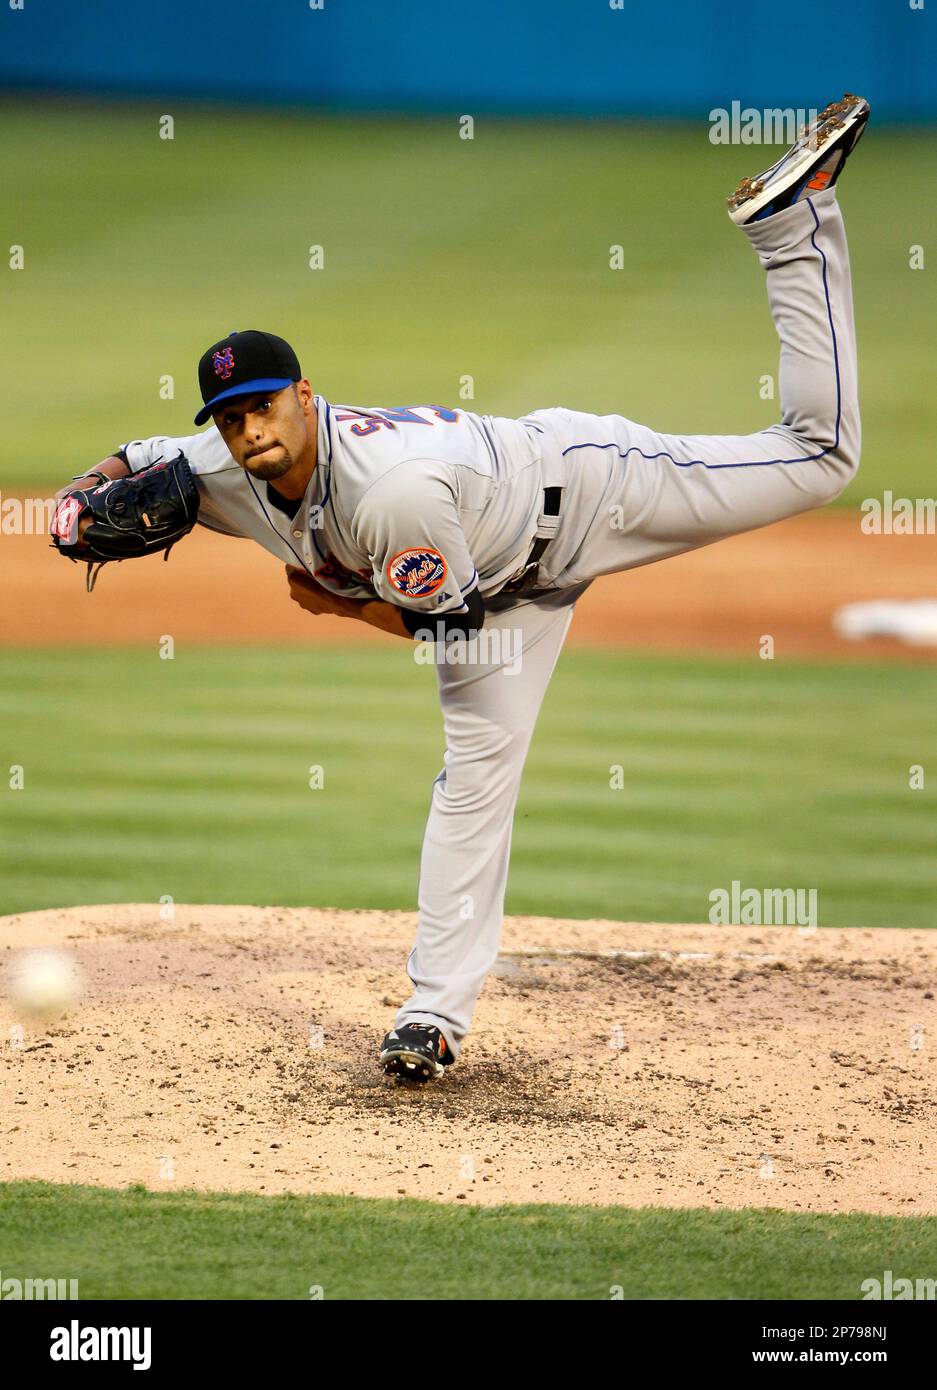 New York Mets pitcher Johan Santana (57) works in the first inning against  the Washington Nationals at Nationals Park in Washington, D.C. on Friday,  August 17, 2012..Credit: Ron Sachs / CNP.(RESTRICTION: NO